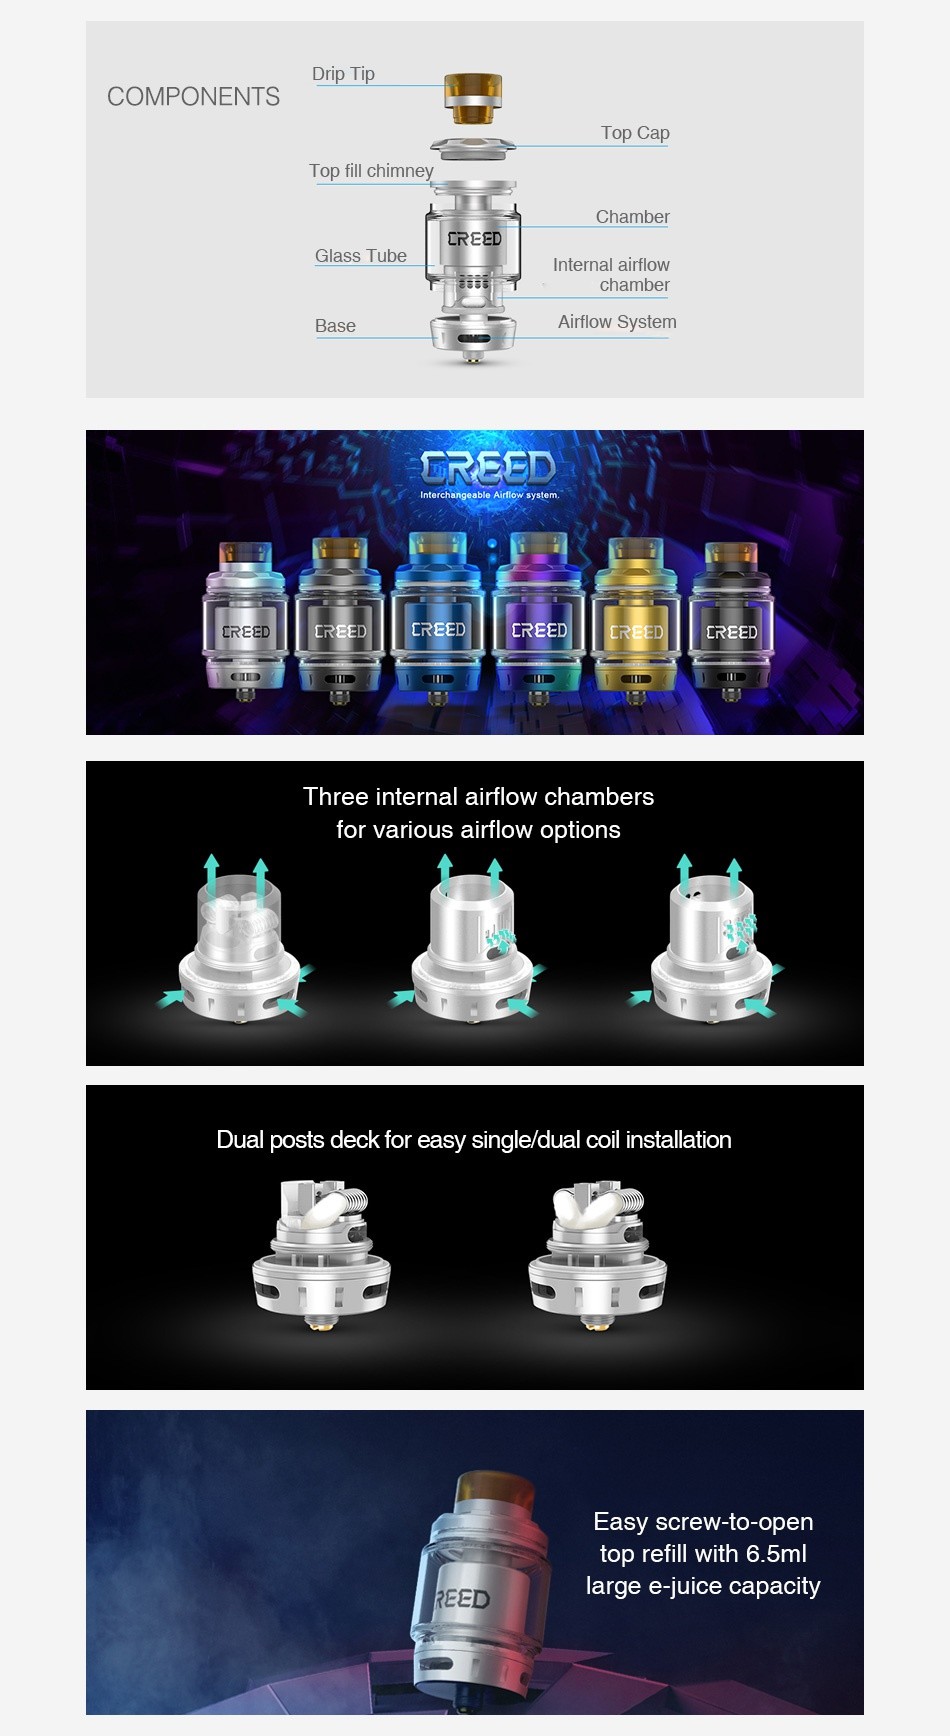 Geekvape Creed RTA 6.5ml D COMPONENTS op Cap Chamber sS Tube  LREED Internal airflow chambe Base Airflow System YEED le Airflow syste CREED CREED Three internal airflow chambers for various airflow options Dual posts deck for easy single dual coil installation Easy screw to open top refill with 6 5m REED large e juice capacity